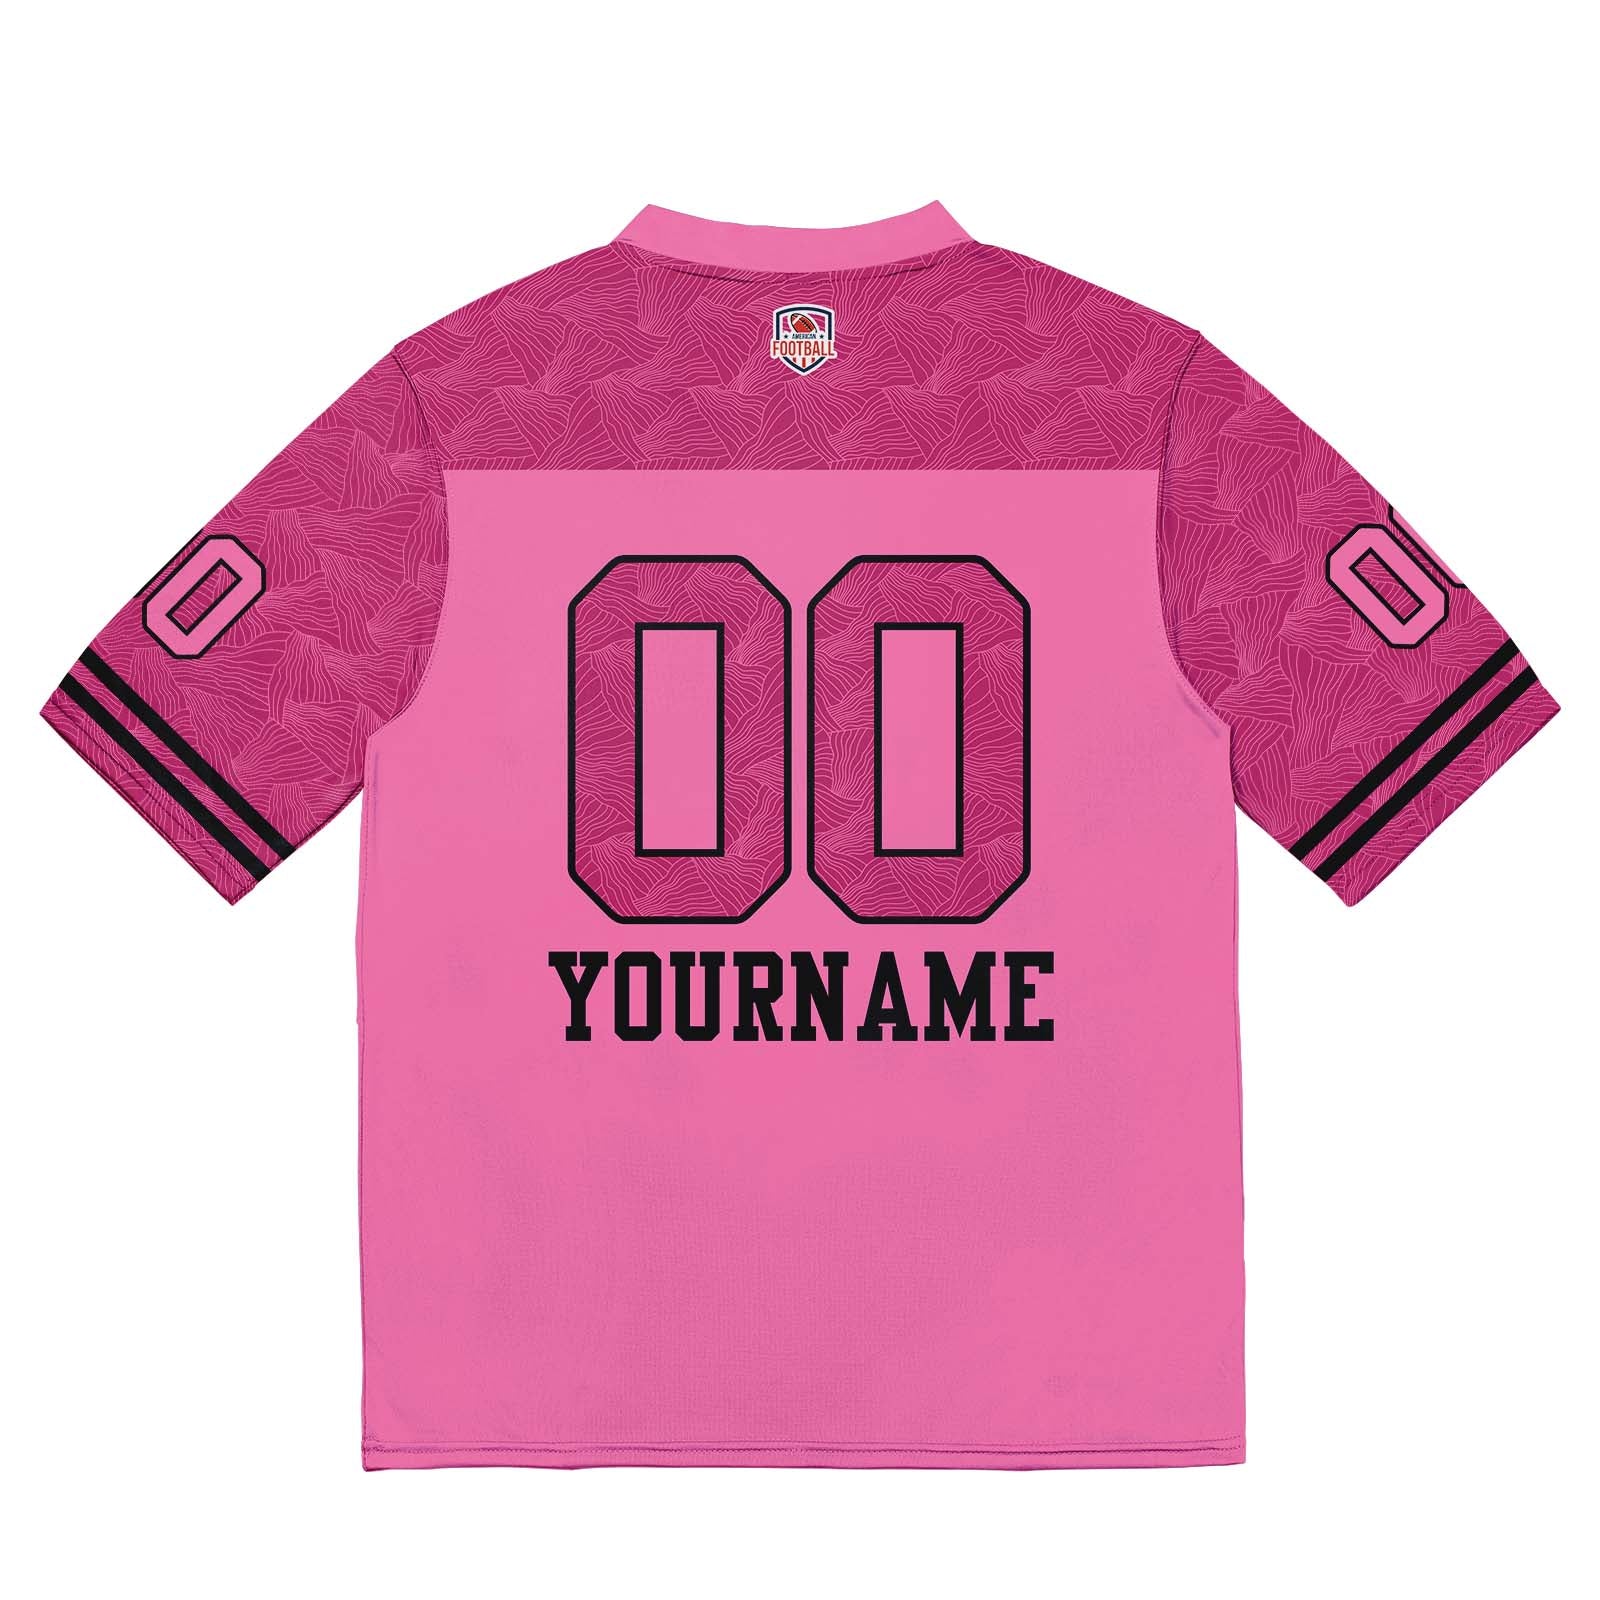 Custom Football Jersey Shirt Personalized Stitched Printed Team Name Number Pink